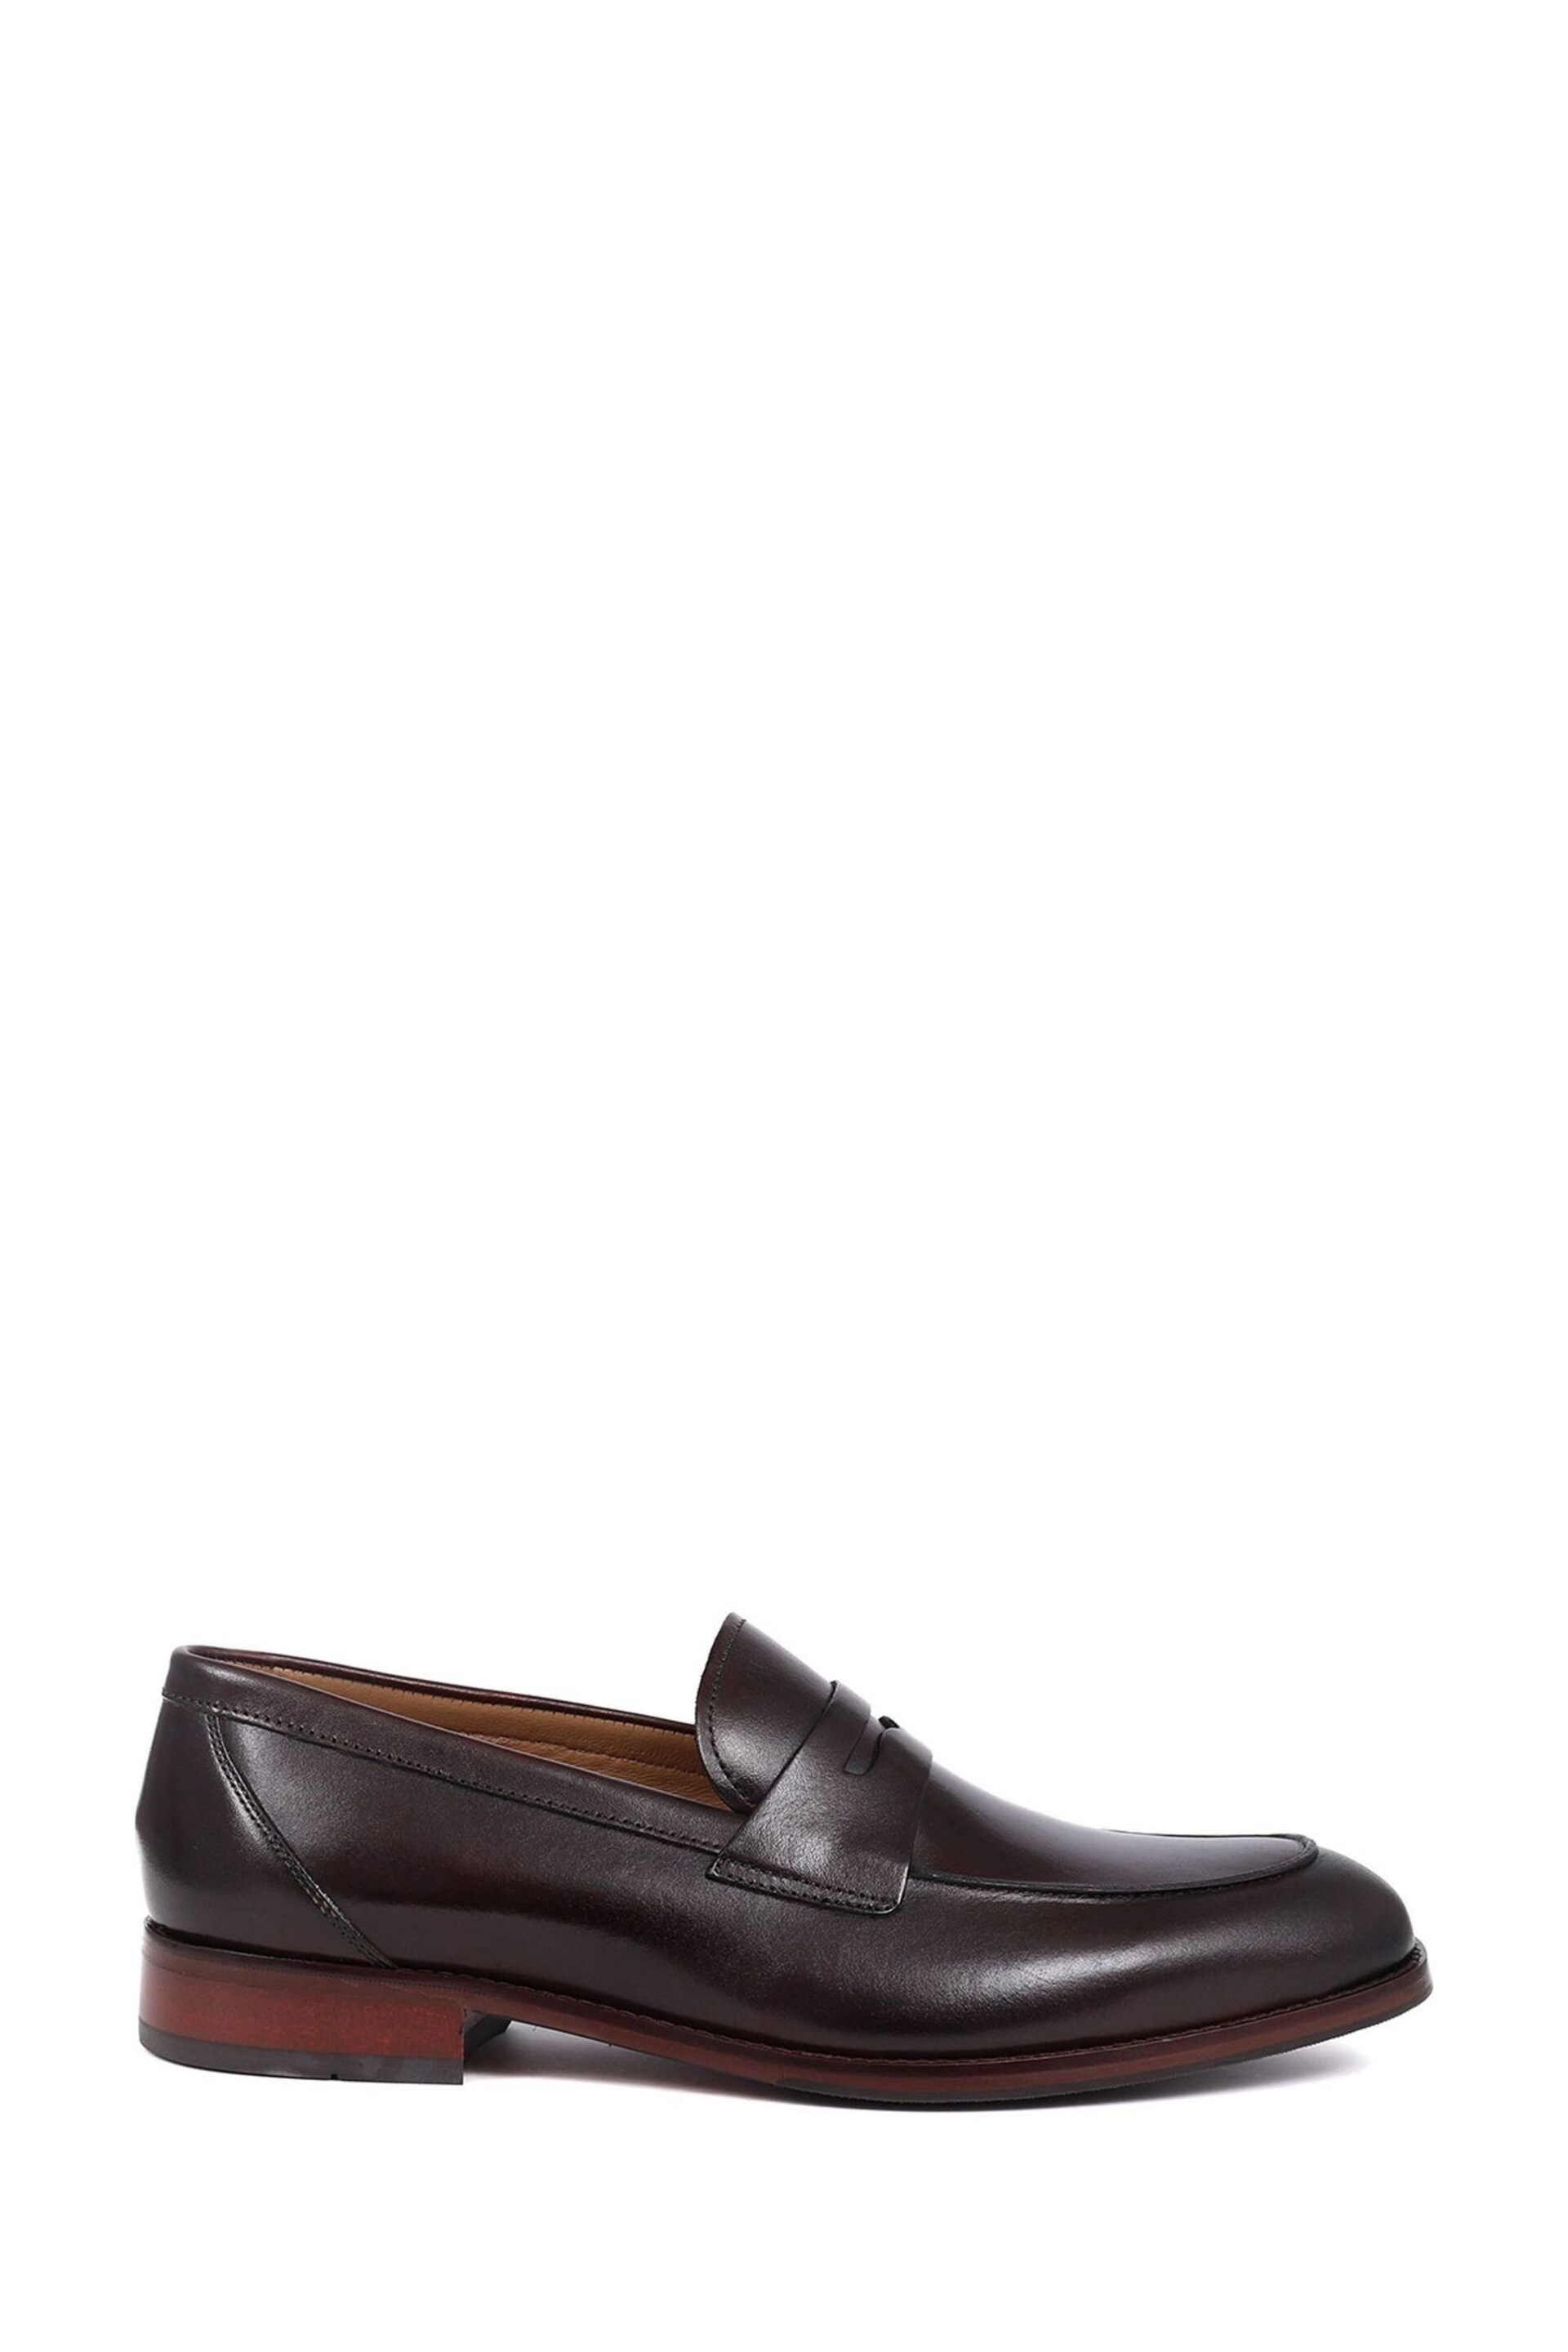 Jones Bootmaker Leather Penny Loafers - Image 2 of 6